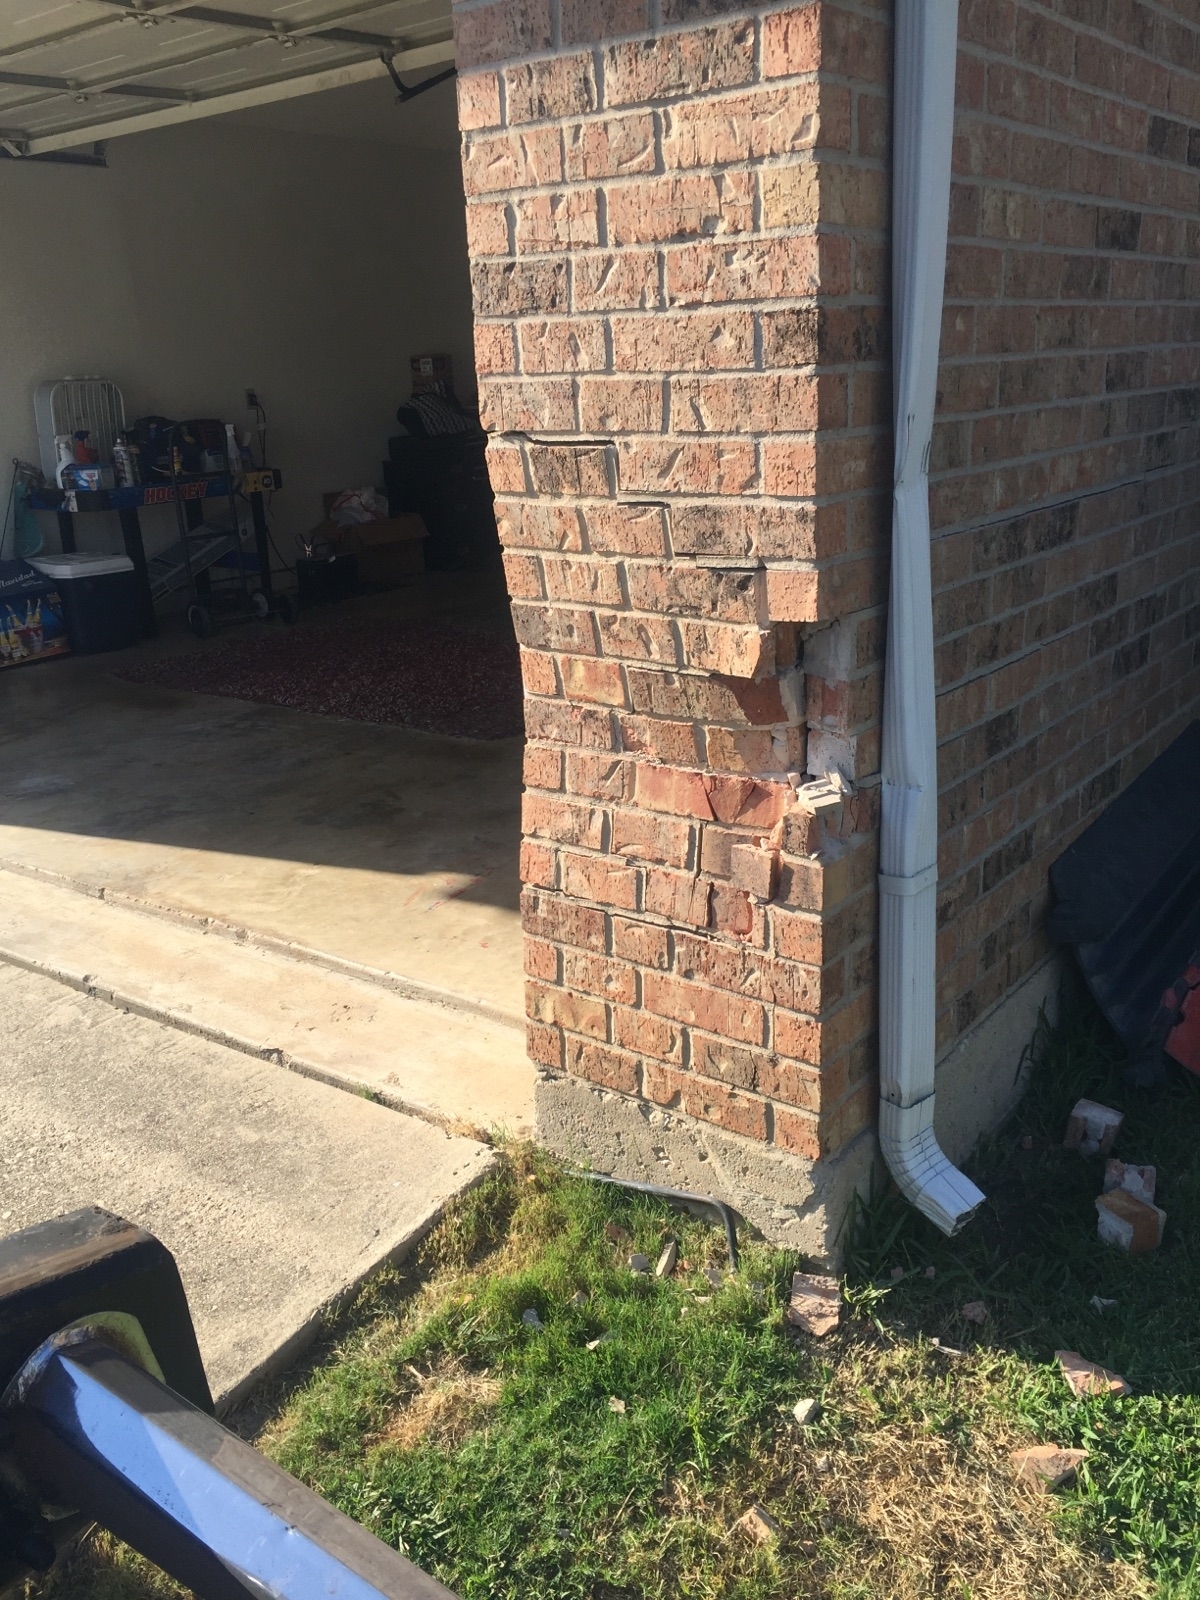 The bricks of someone&#x27;s garage completed rammed into and curved